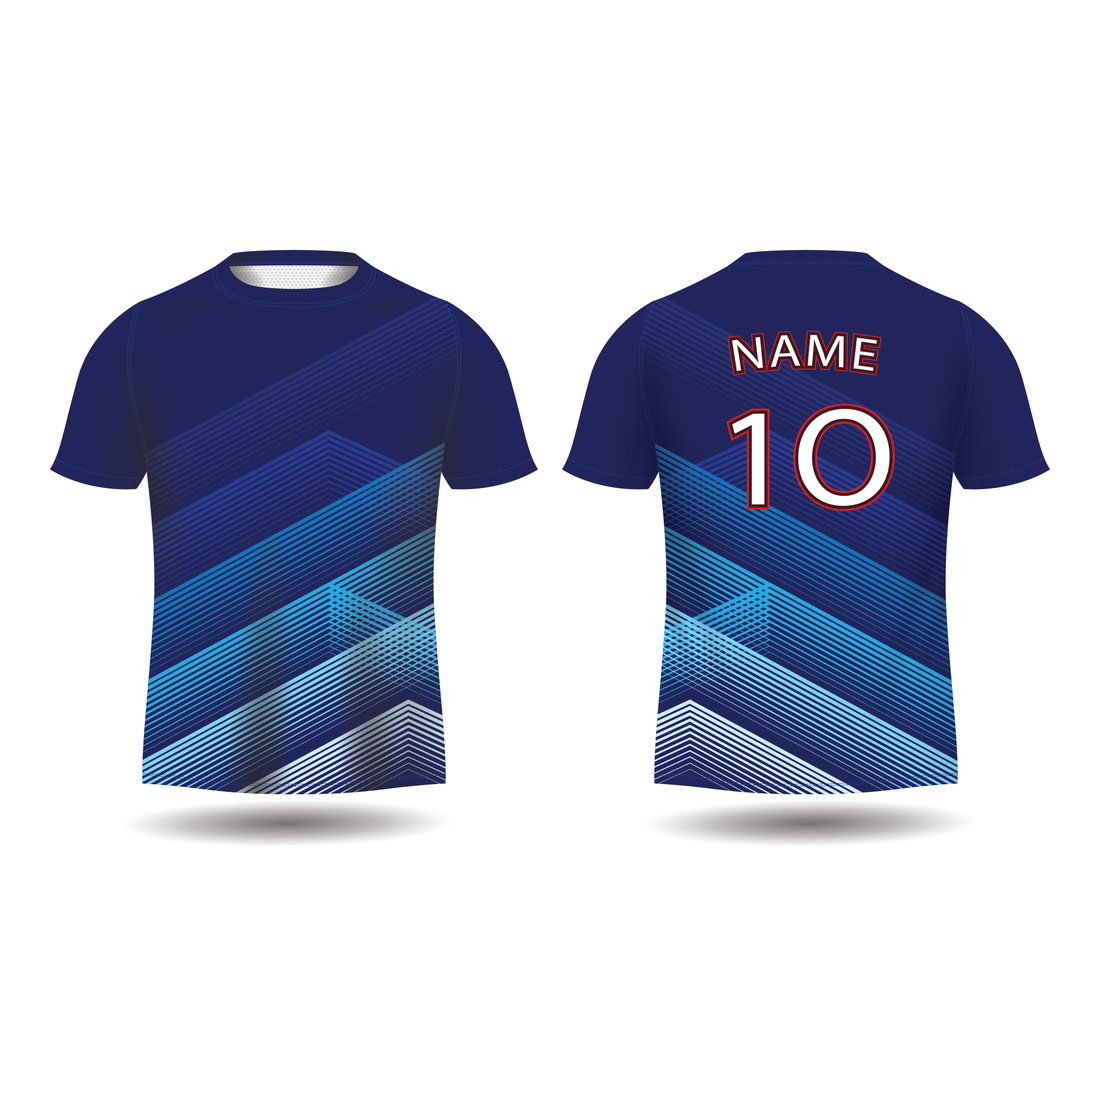 NEXT PRINT All Over Printed Customized Sublimation T-Shirt Unisex Sports Jersey Player Name & Number, Team Name NP50000250